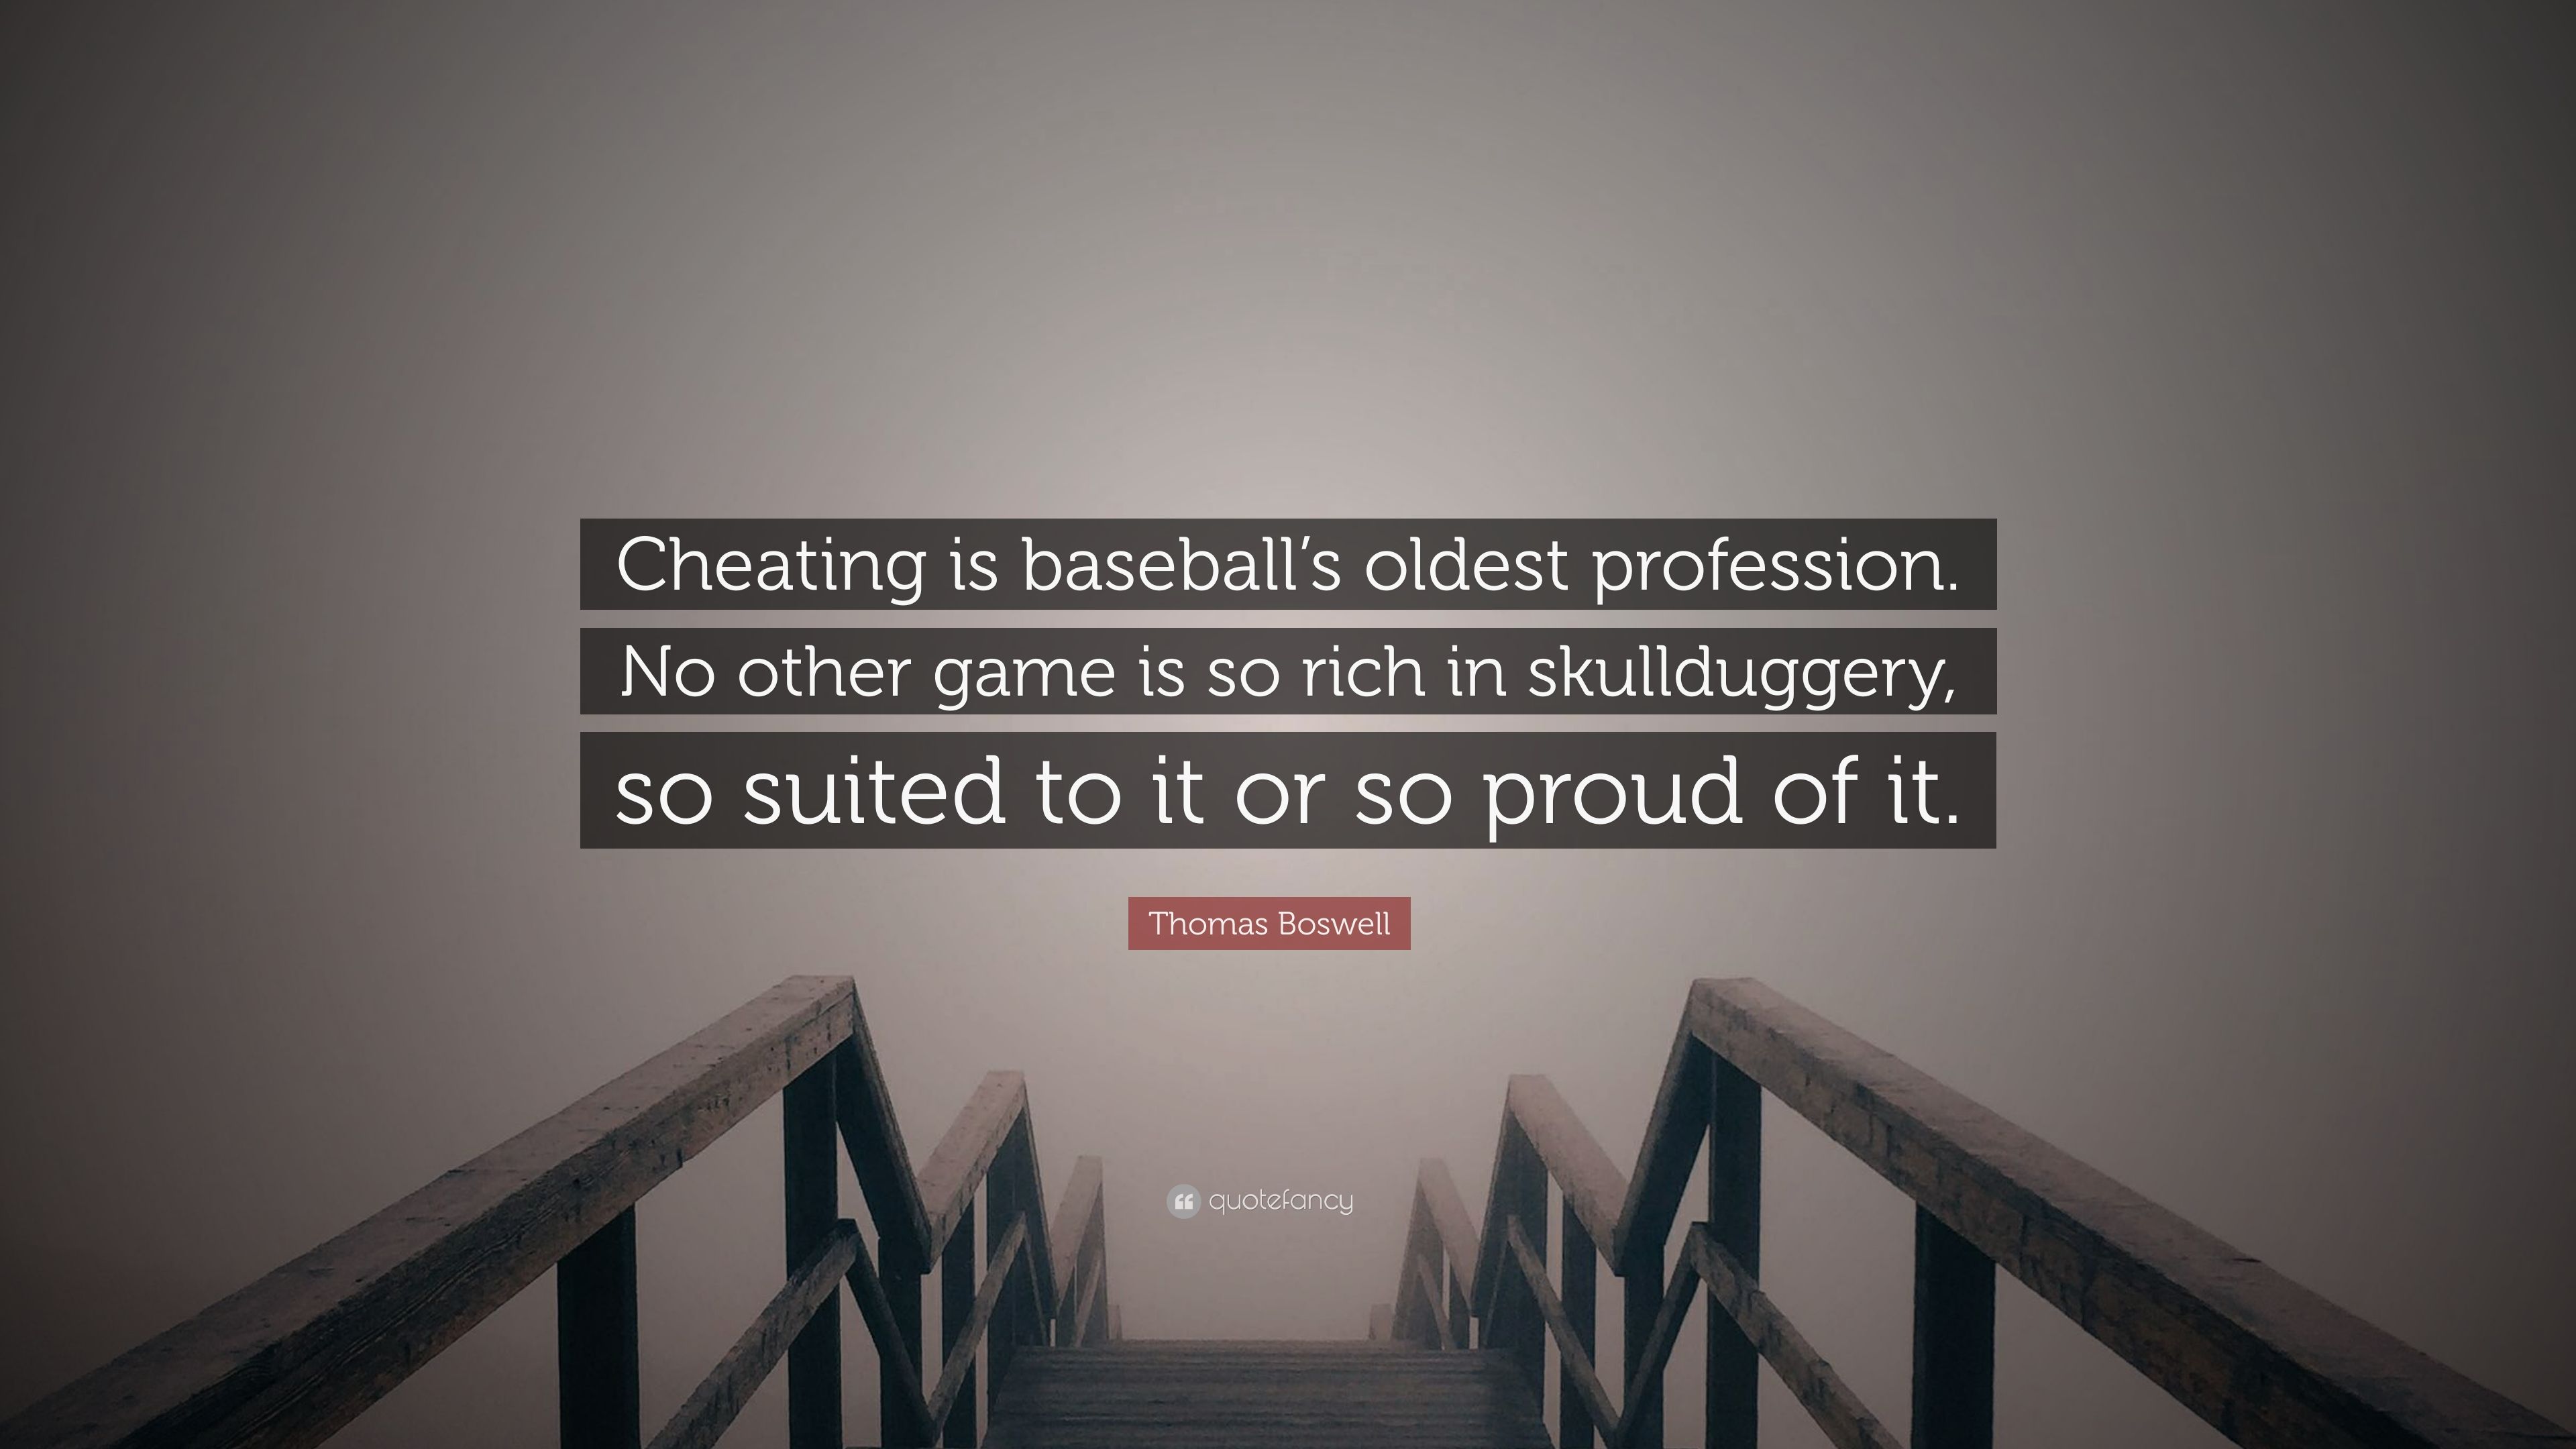 Thomas Boswell Quote: “Cheating is baseball's oldest profession. No other game is so rich in skullduggery, so suited to it or so proud of it.” (9 wallpaper)